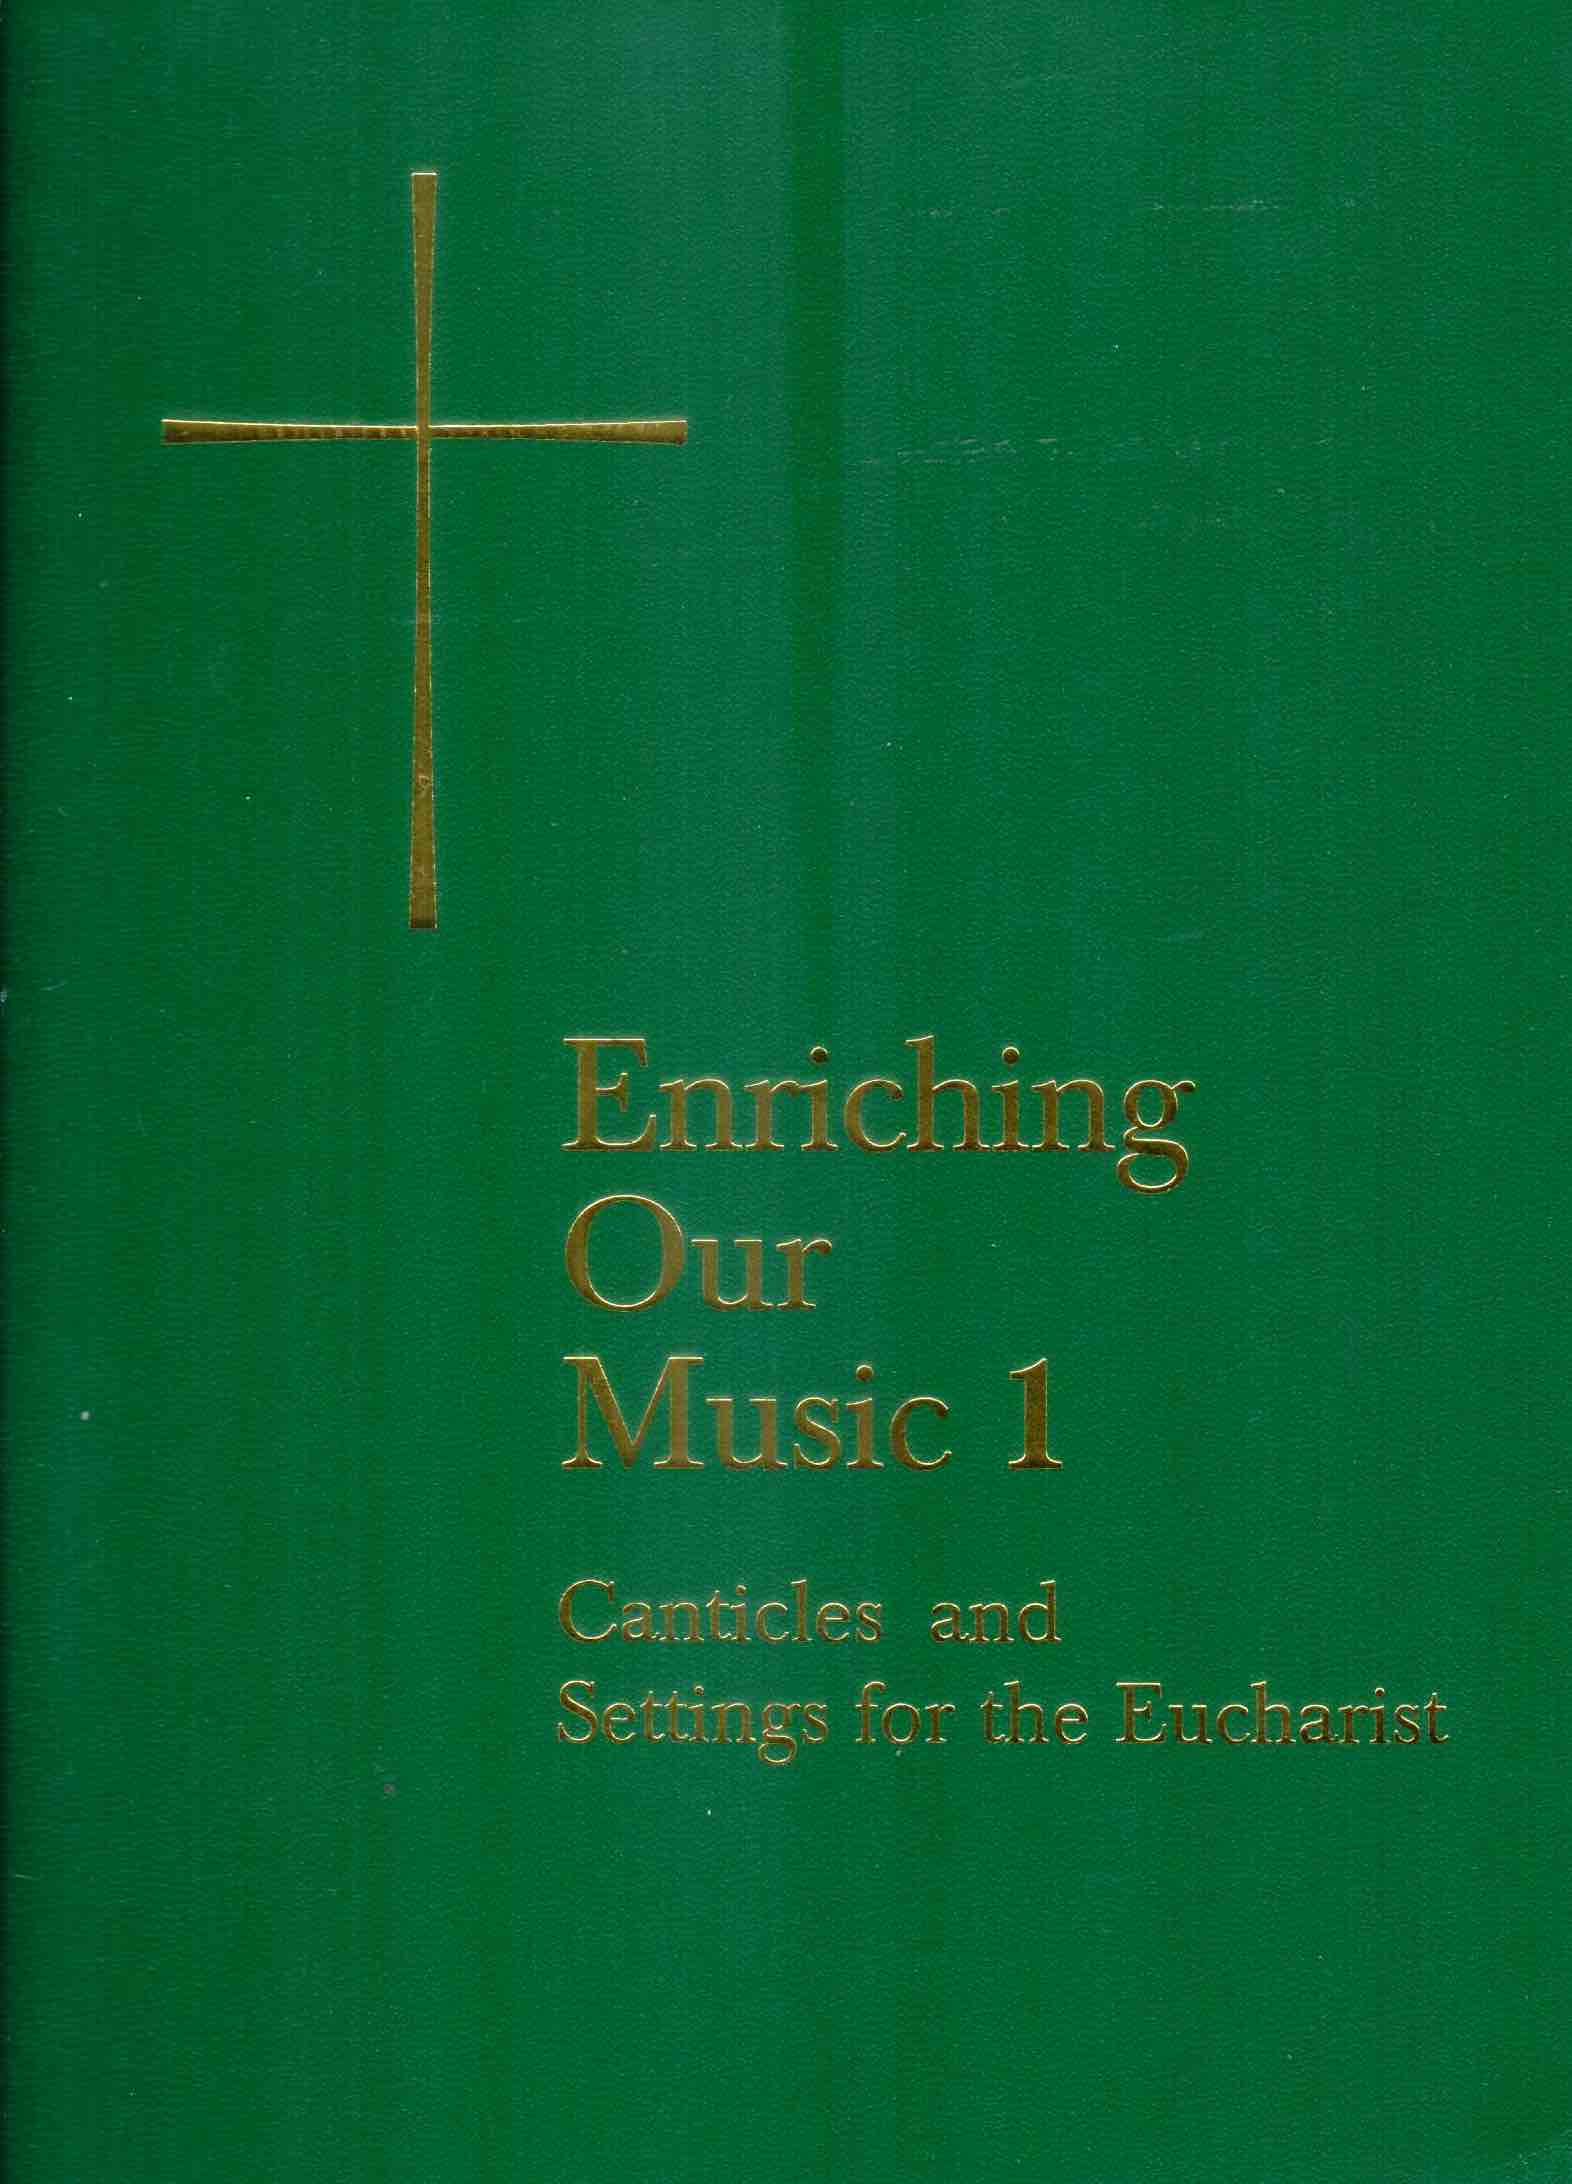 Cover of Enriching our music 1